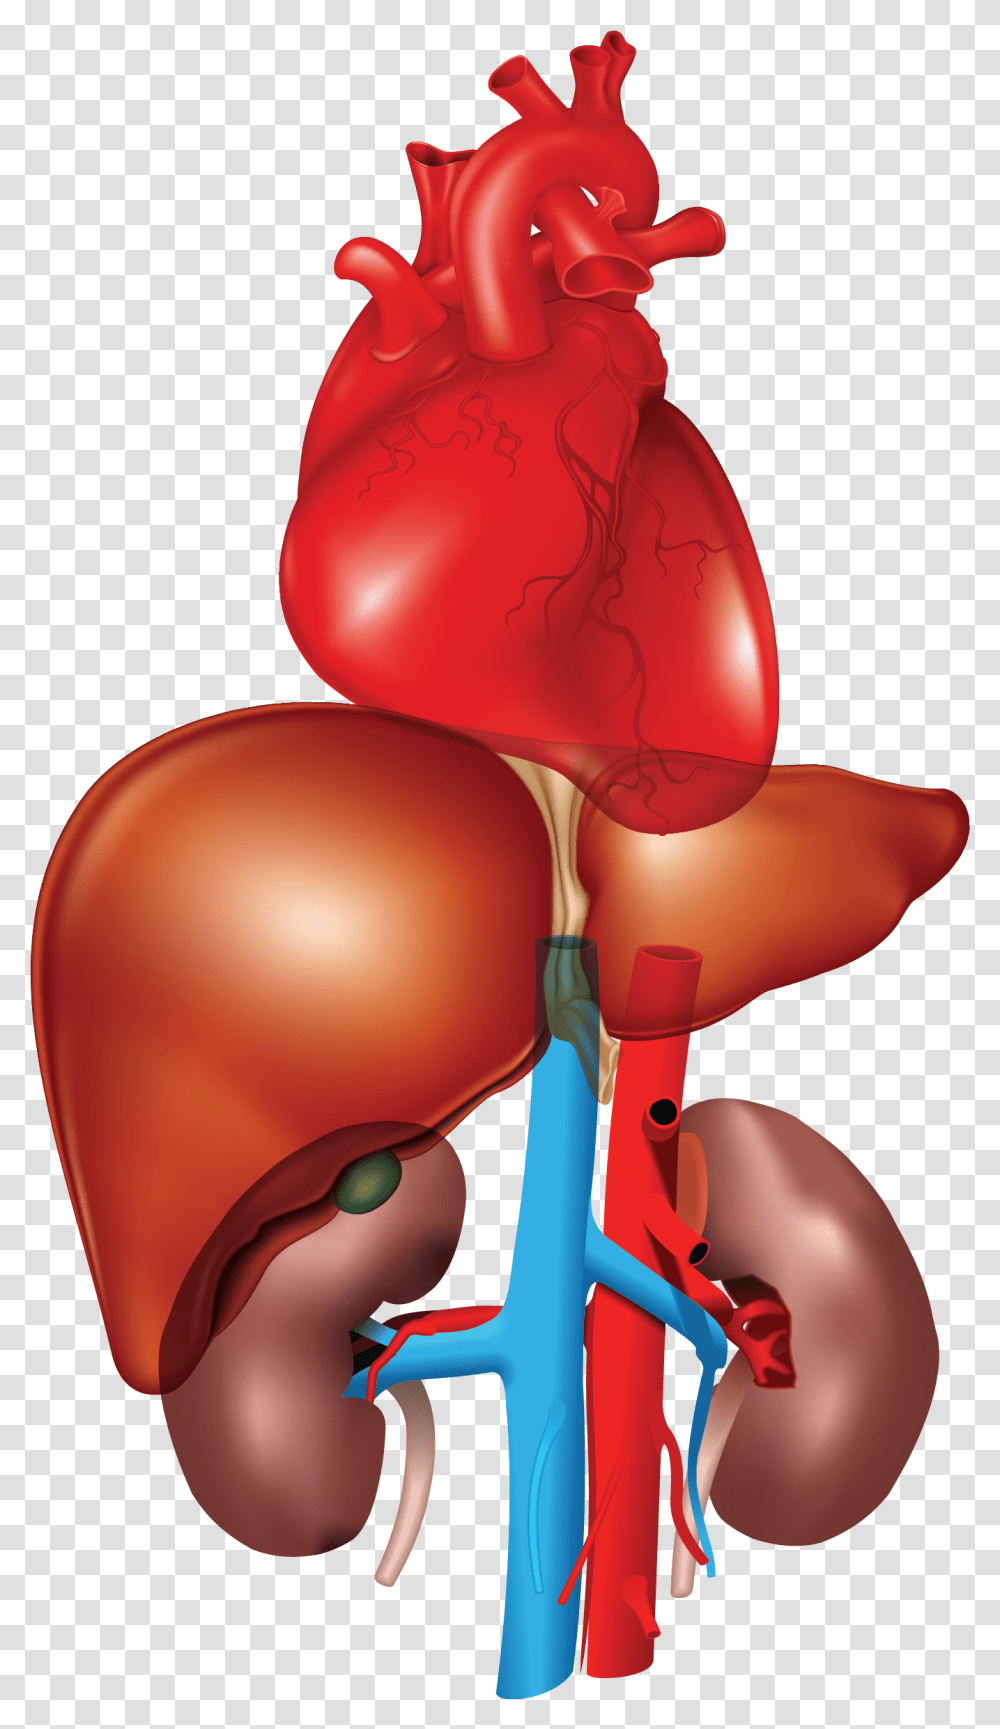 Heart Liver Kidney Kidney Liver And Heart, Toy, Stomach, Ball, Skin Transparent Png